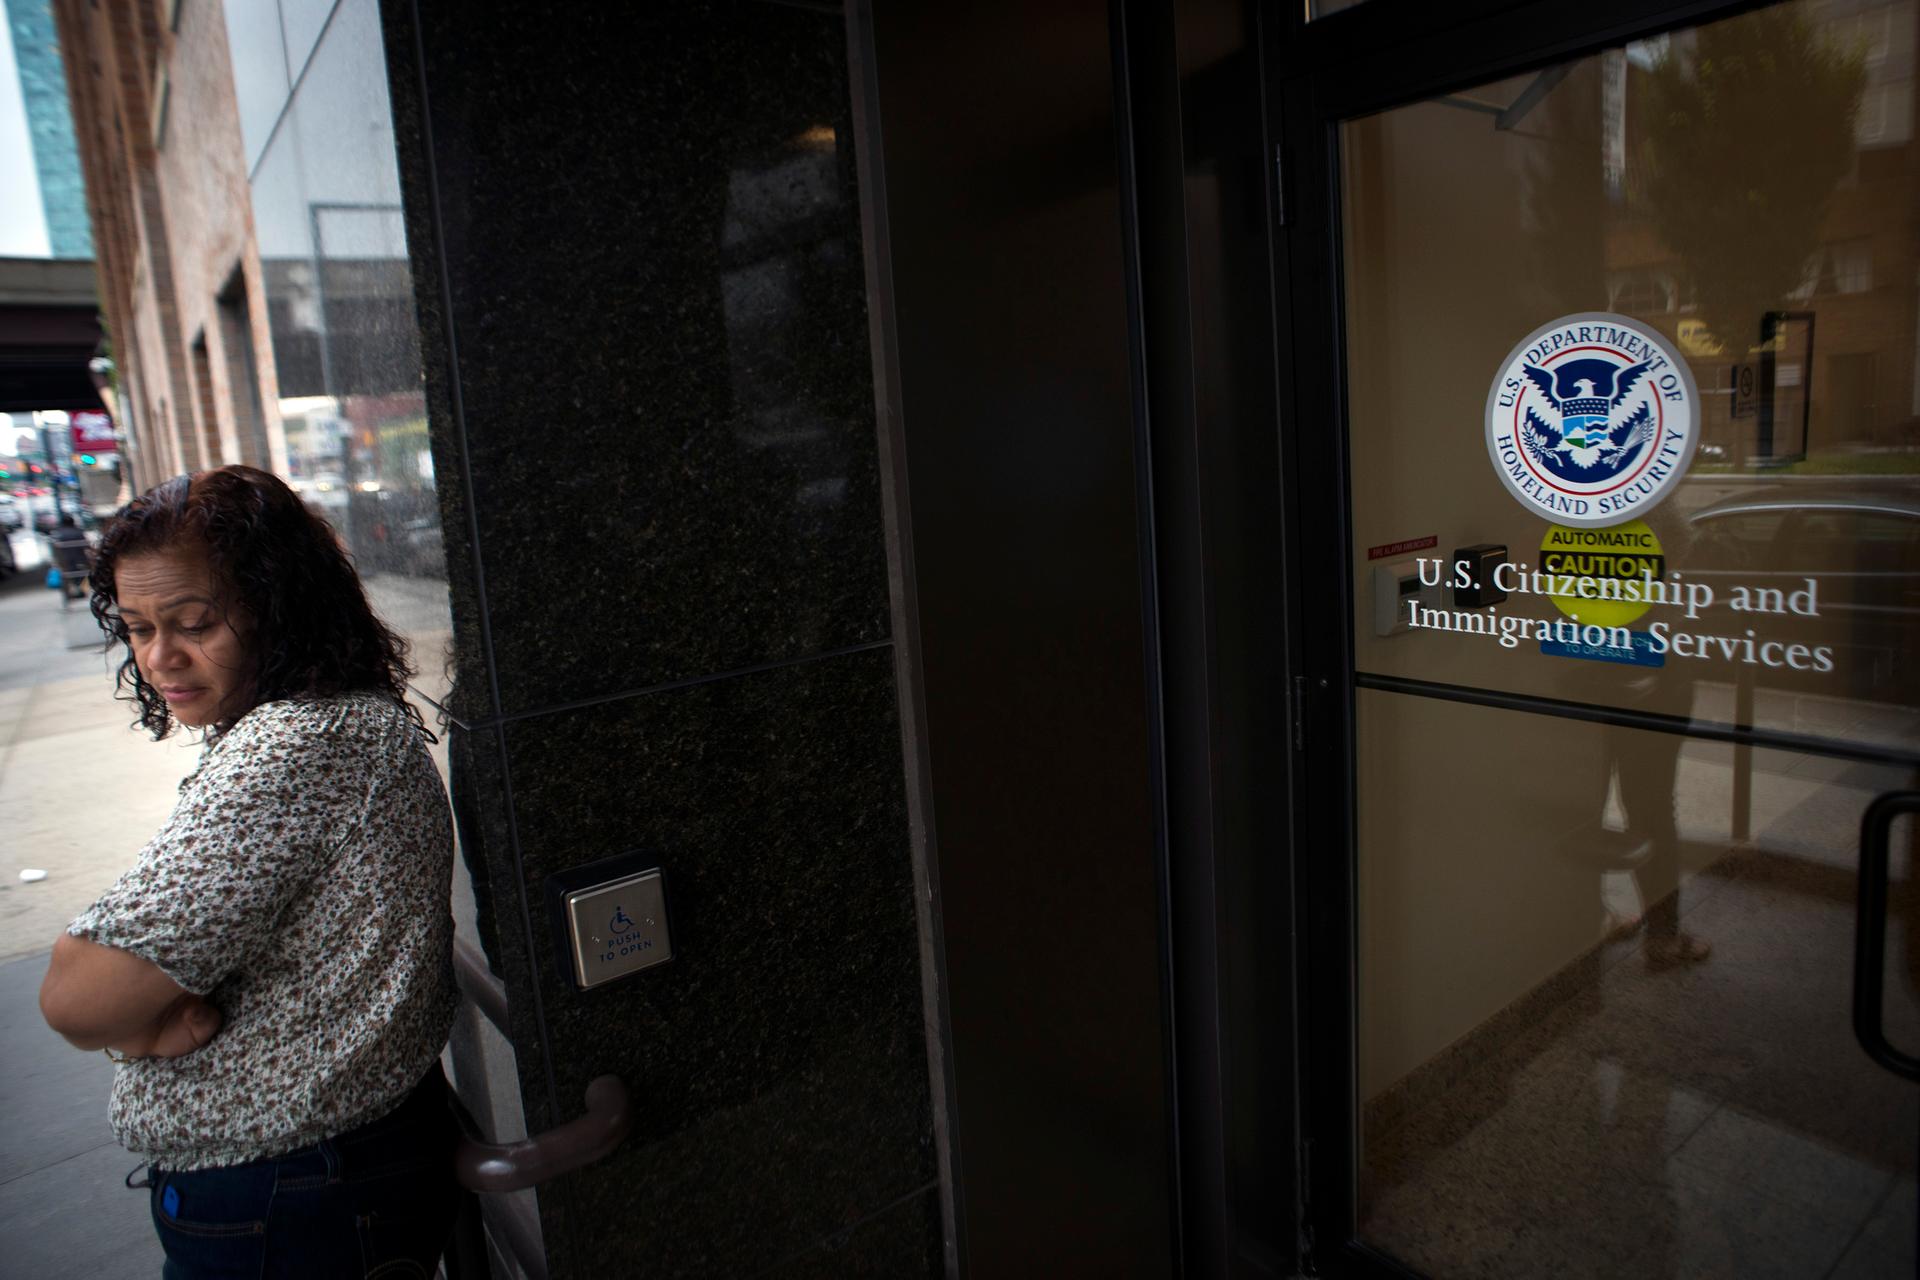 A woman stands in front of the doors of the US Citizenship and Immigration Services offices in New York.